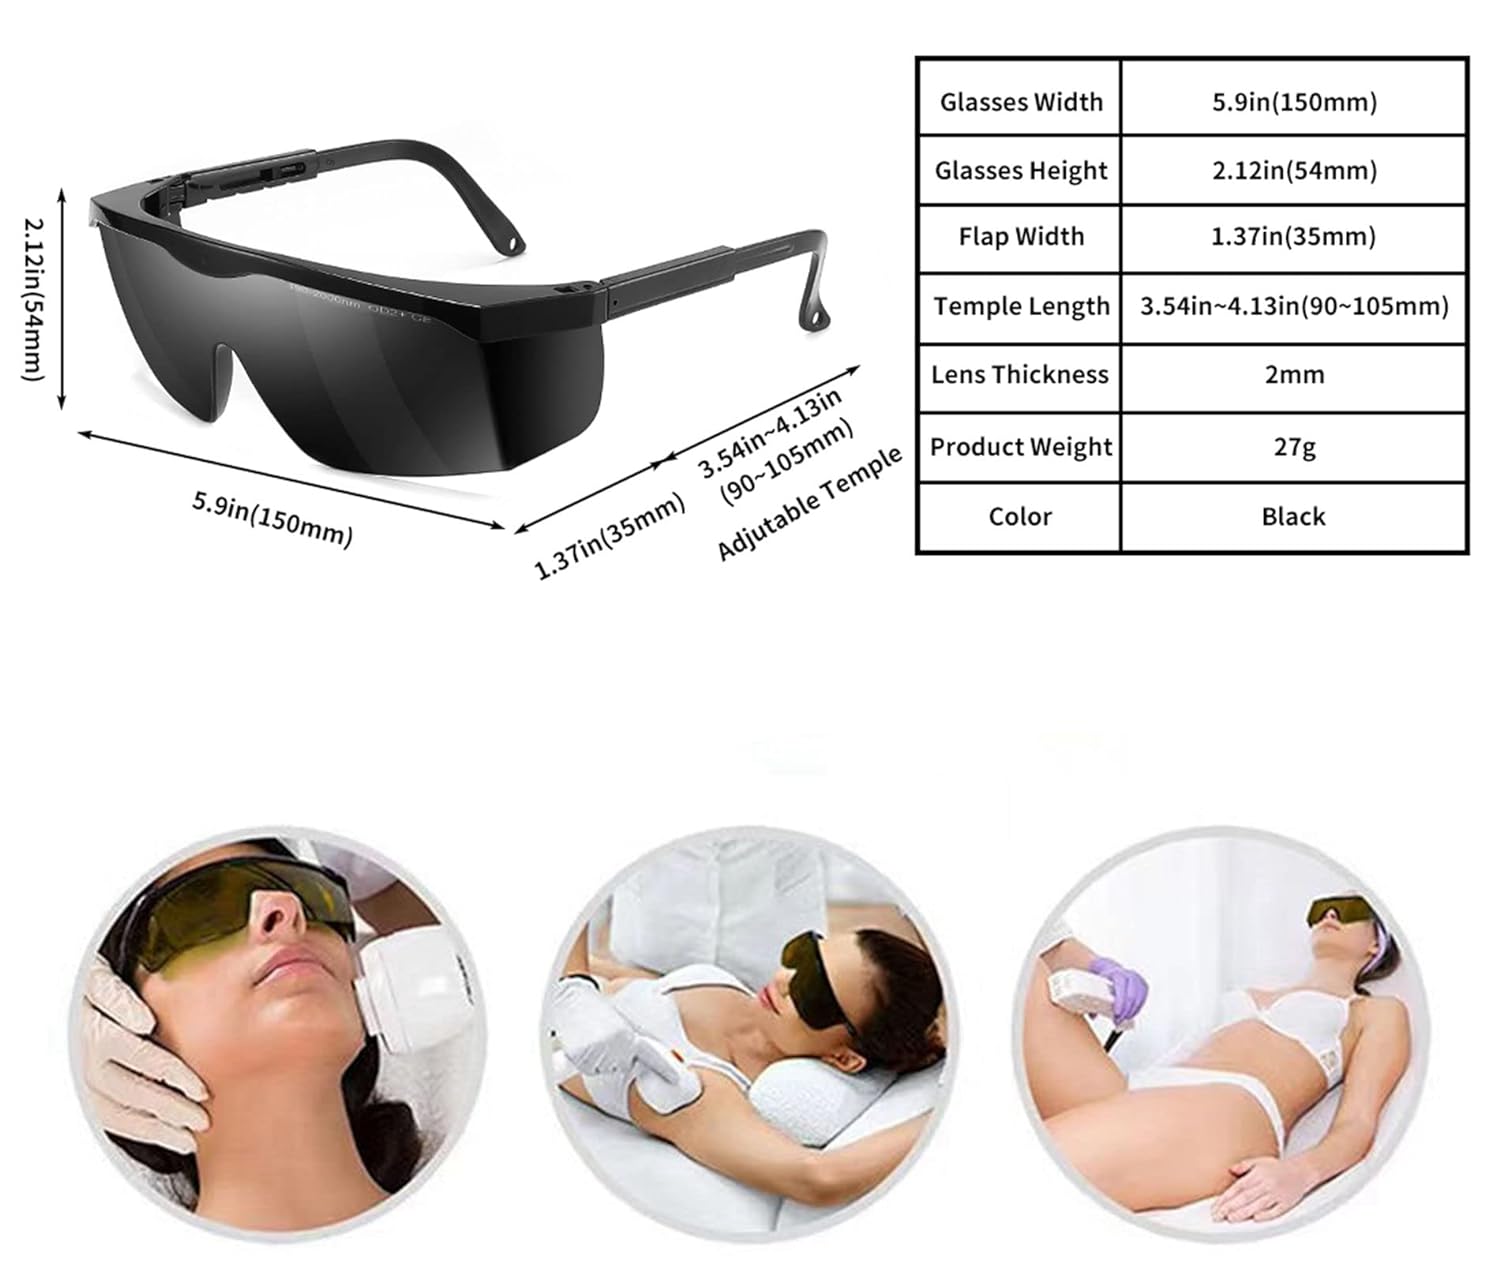 Alsenor IPL 190nm-490nm Laser Safety Glasses Goggles For Laser Cosmetology Operator Eye Protection And Laser Hair Removal Treatment